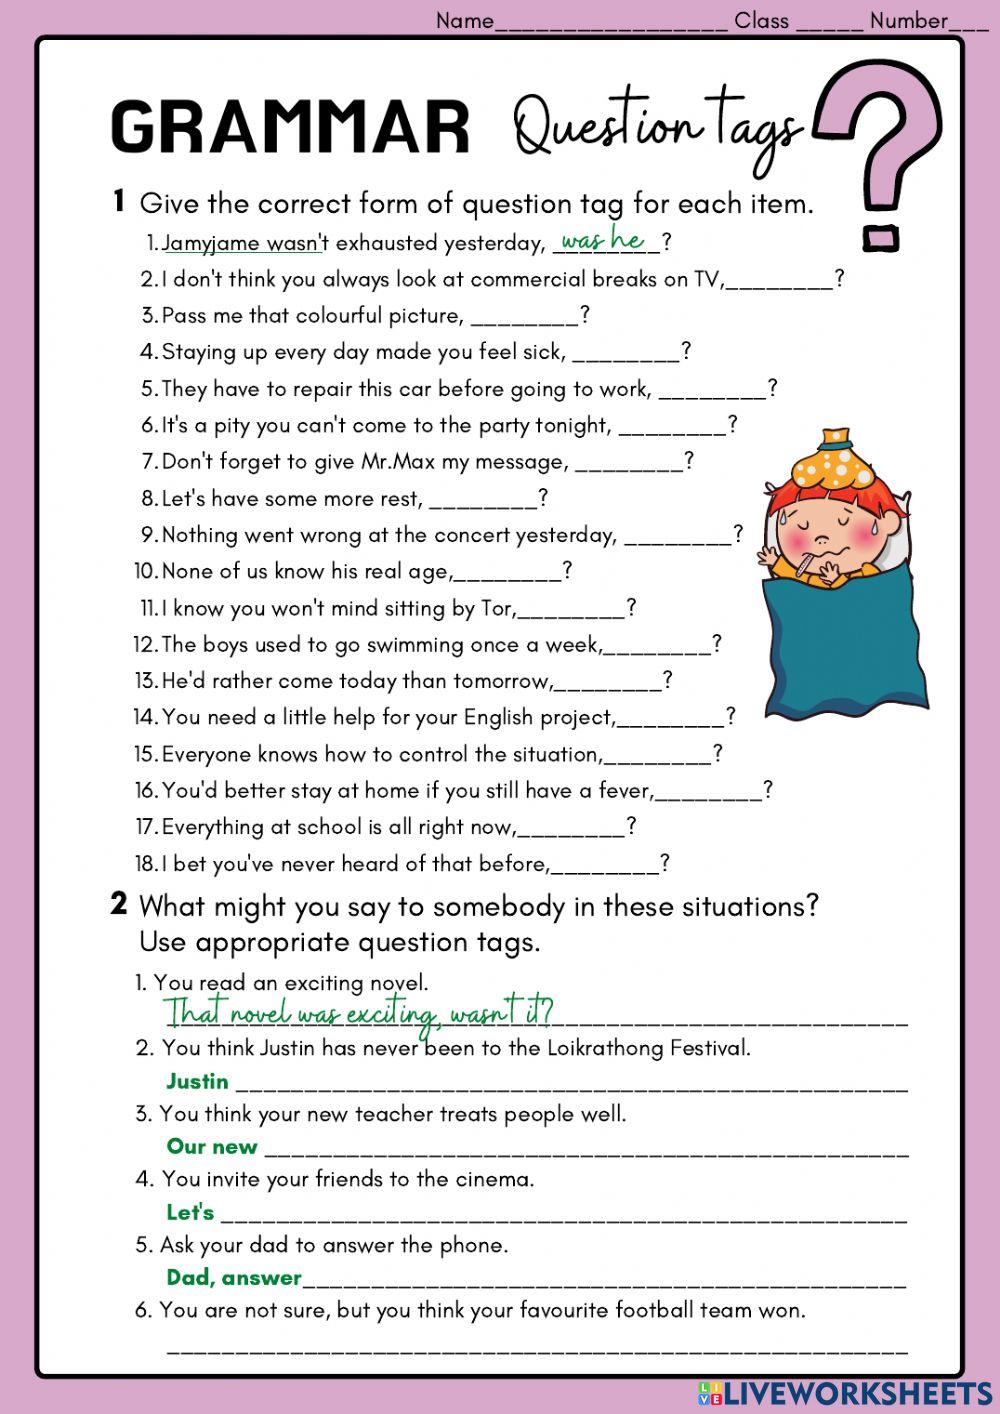 Question Tags online exercise for 10 | Live Worksheets